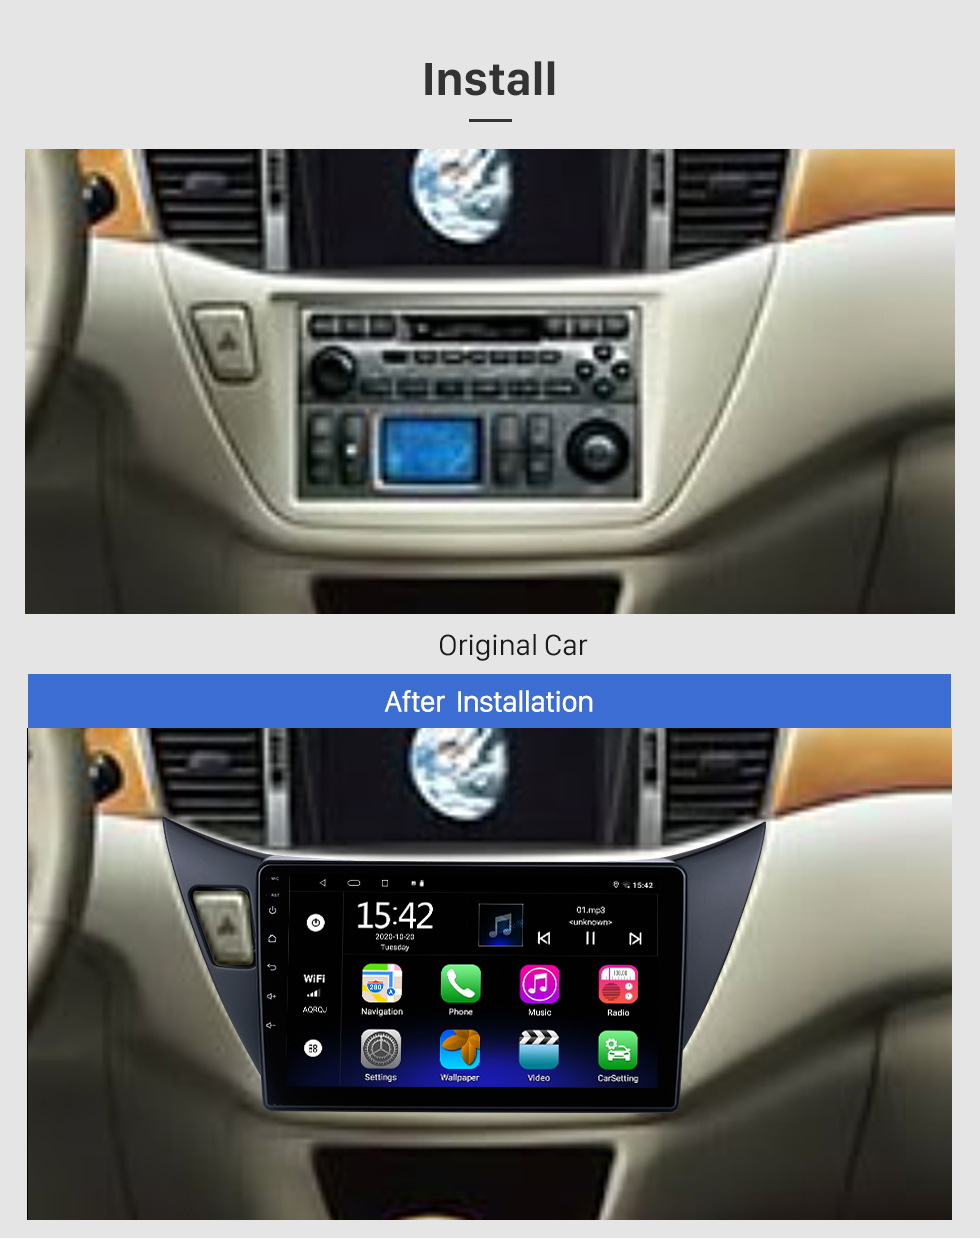 Seicane HD Touchscreen 9 inch Android 10.0 GPS Navigation Radio for 2001-2007 Mitsubishi Lancer LHD with WIFI Carplay Bluetooth USB support RDS OBD2 DVR 4G